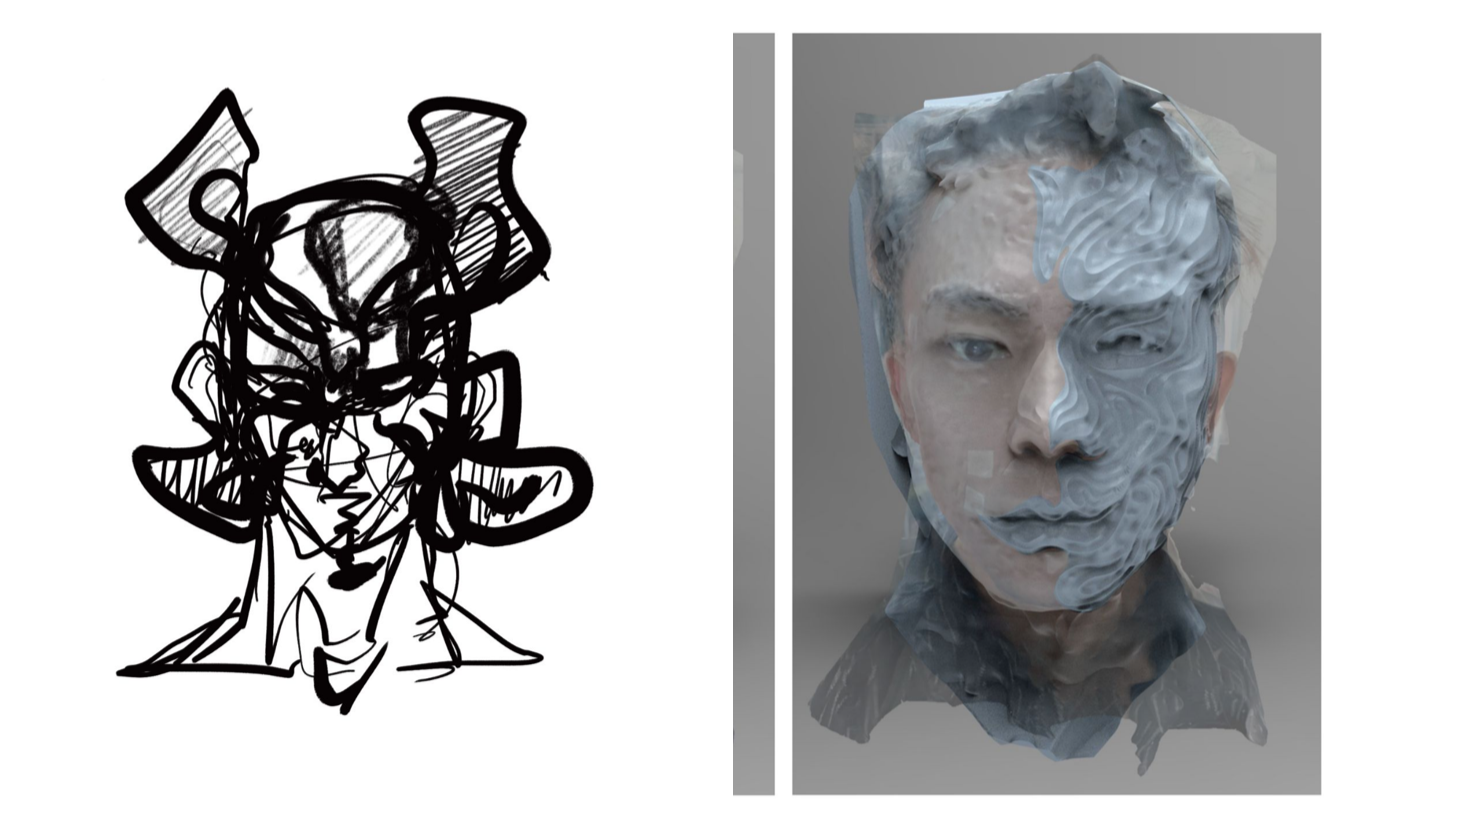 Two images side by side: one black on white chaotic sketch of a face, one superimposed image of blue swirl design on a human male face